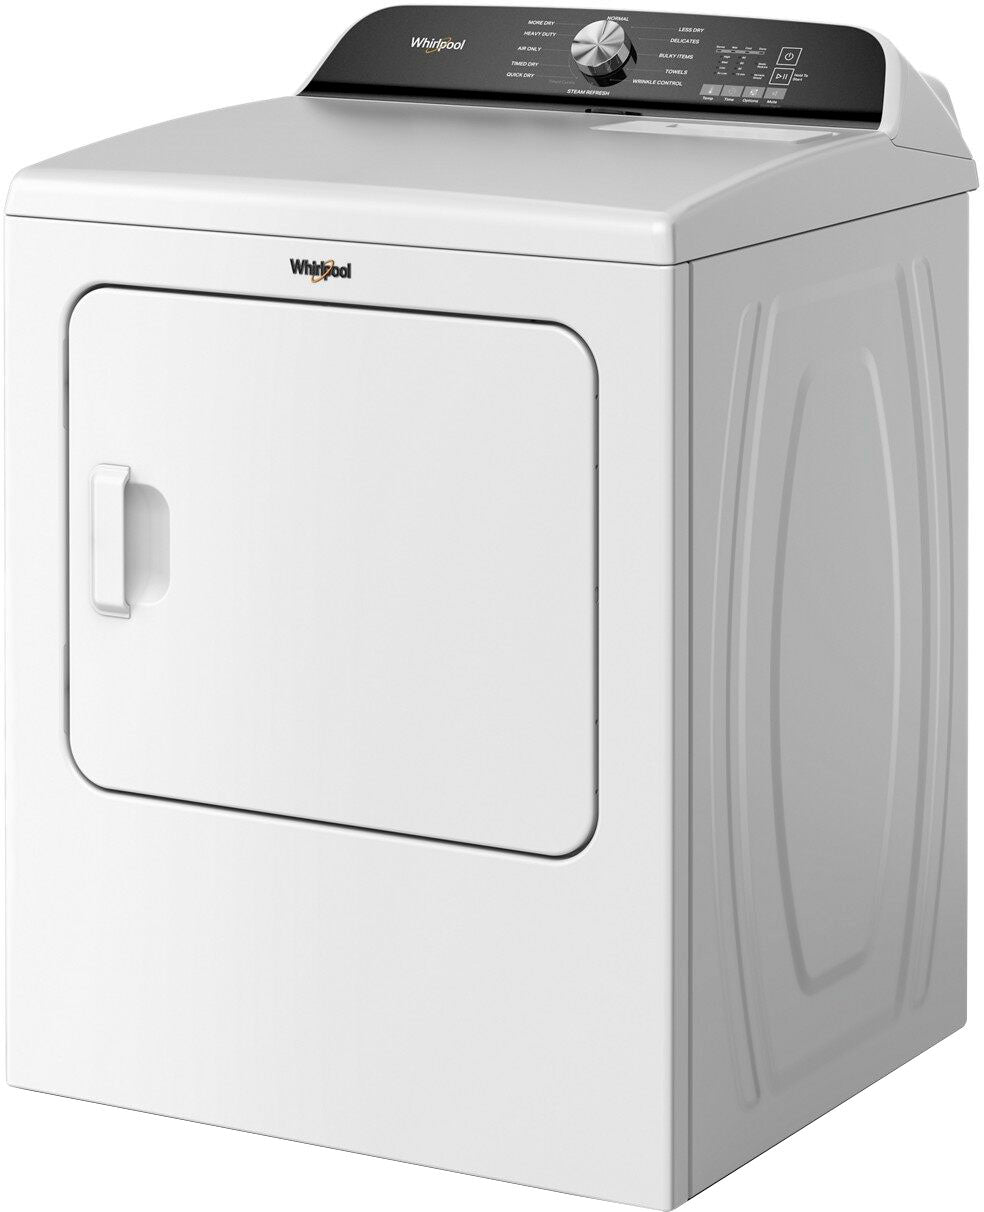 Whirlpool - 7.0 Cu. Ft. Electric Dryer with Moisture Sensor - White_3